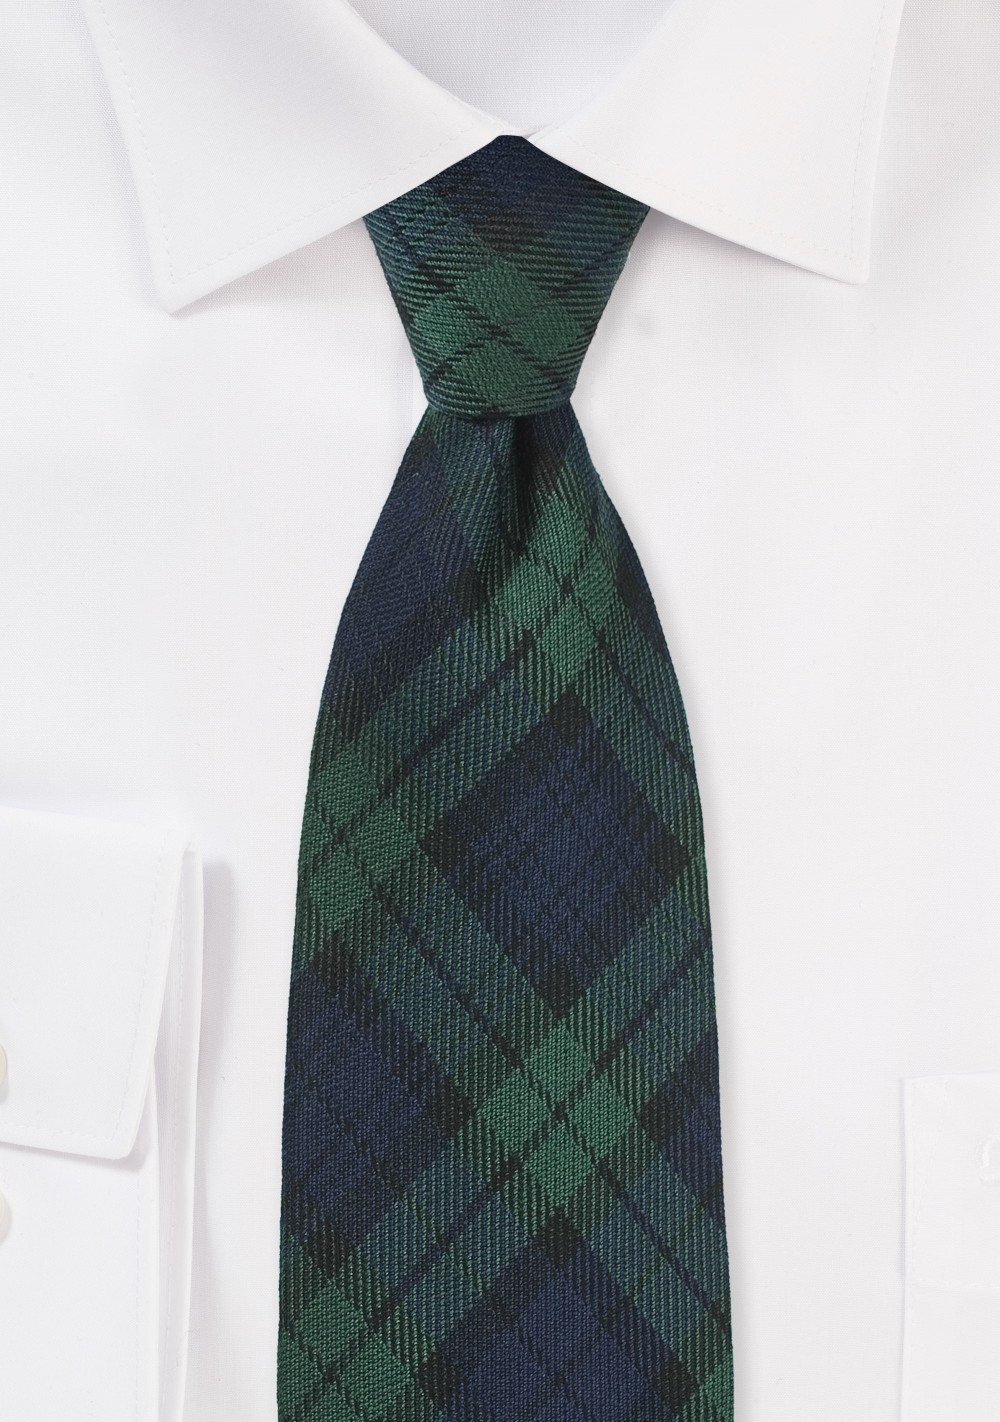 Extra Long Tartan Plaid Tie in Navy and Green